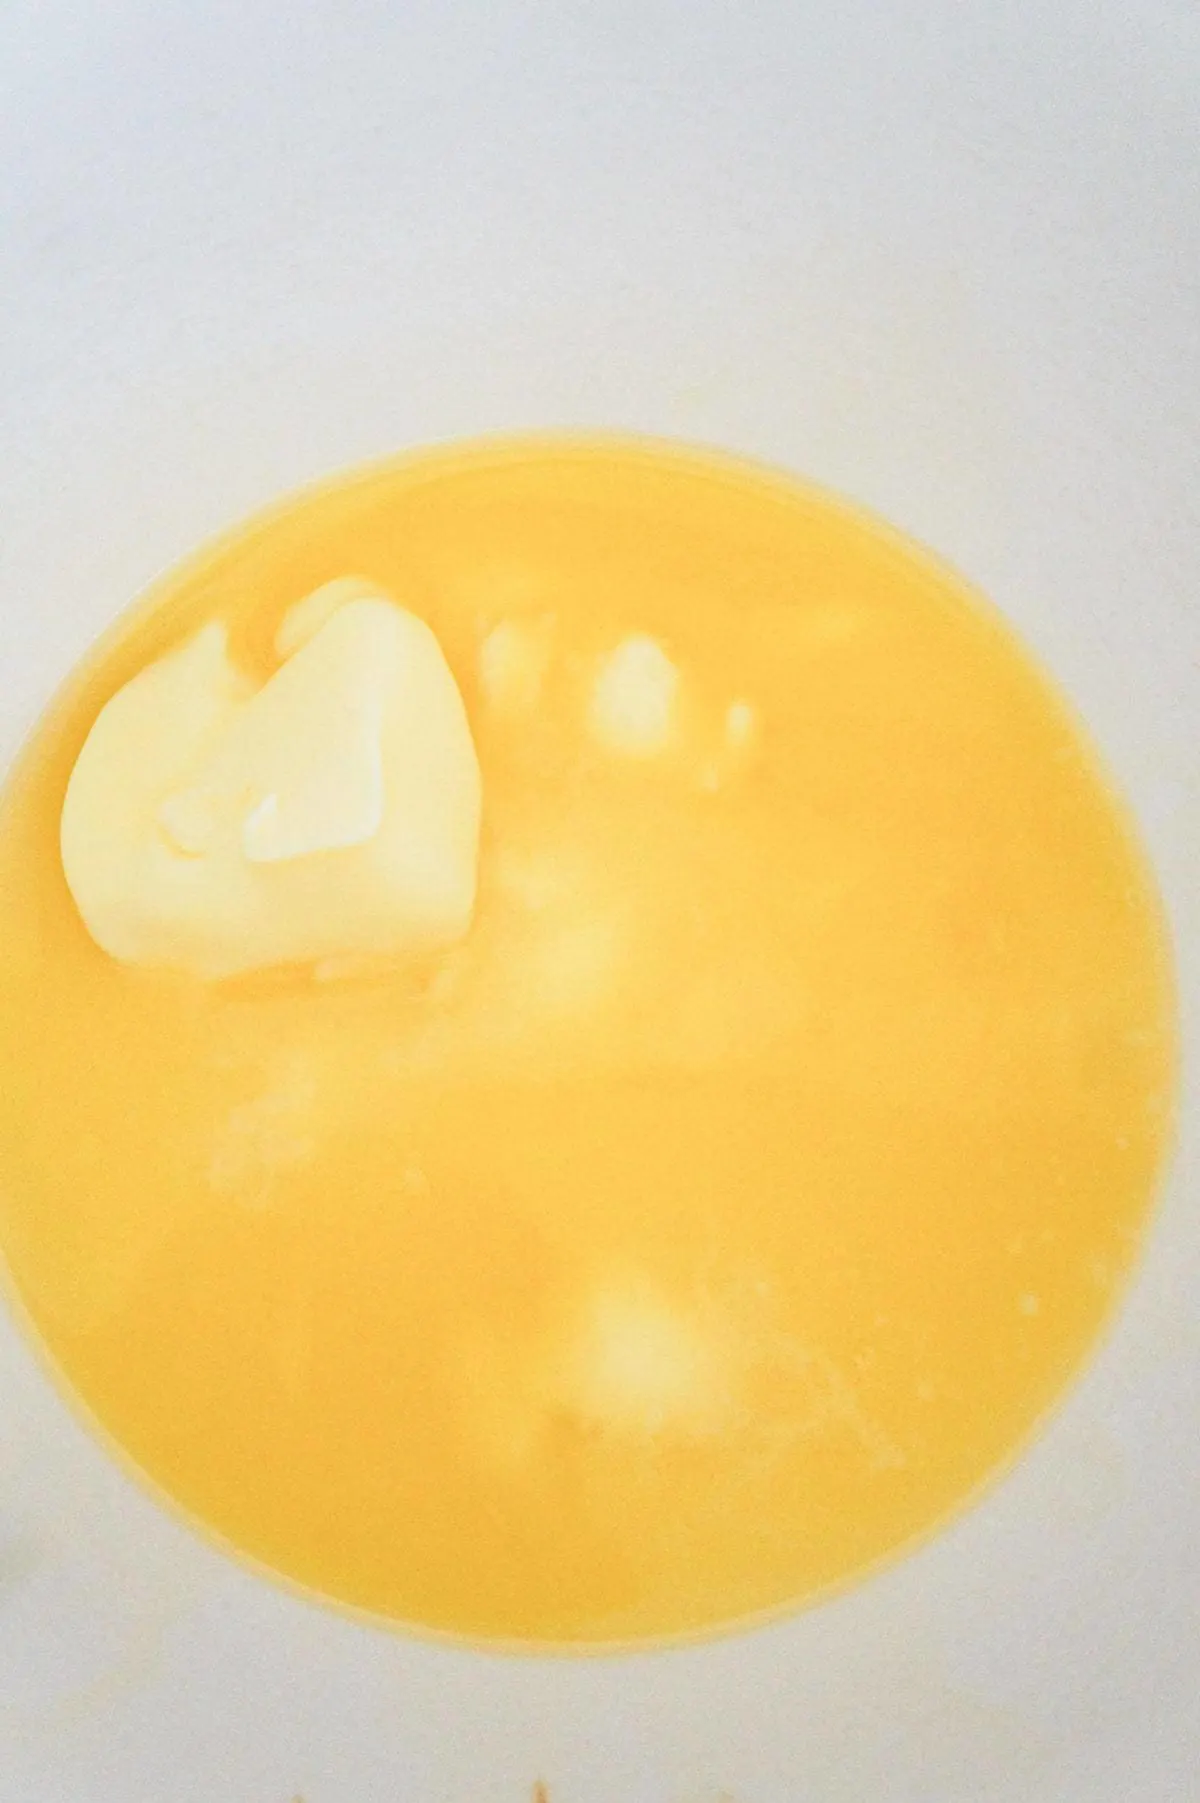 melted butter in a mixing bowl